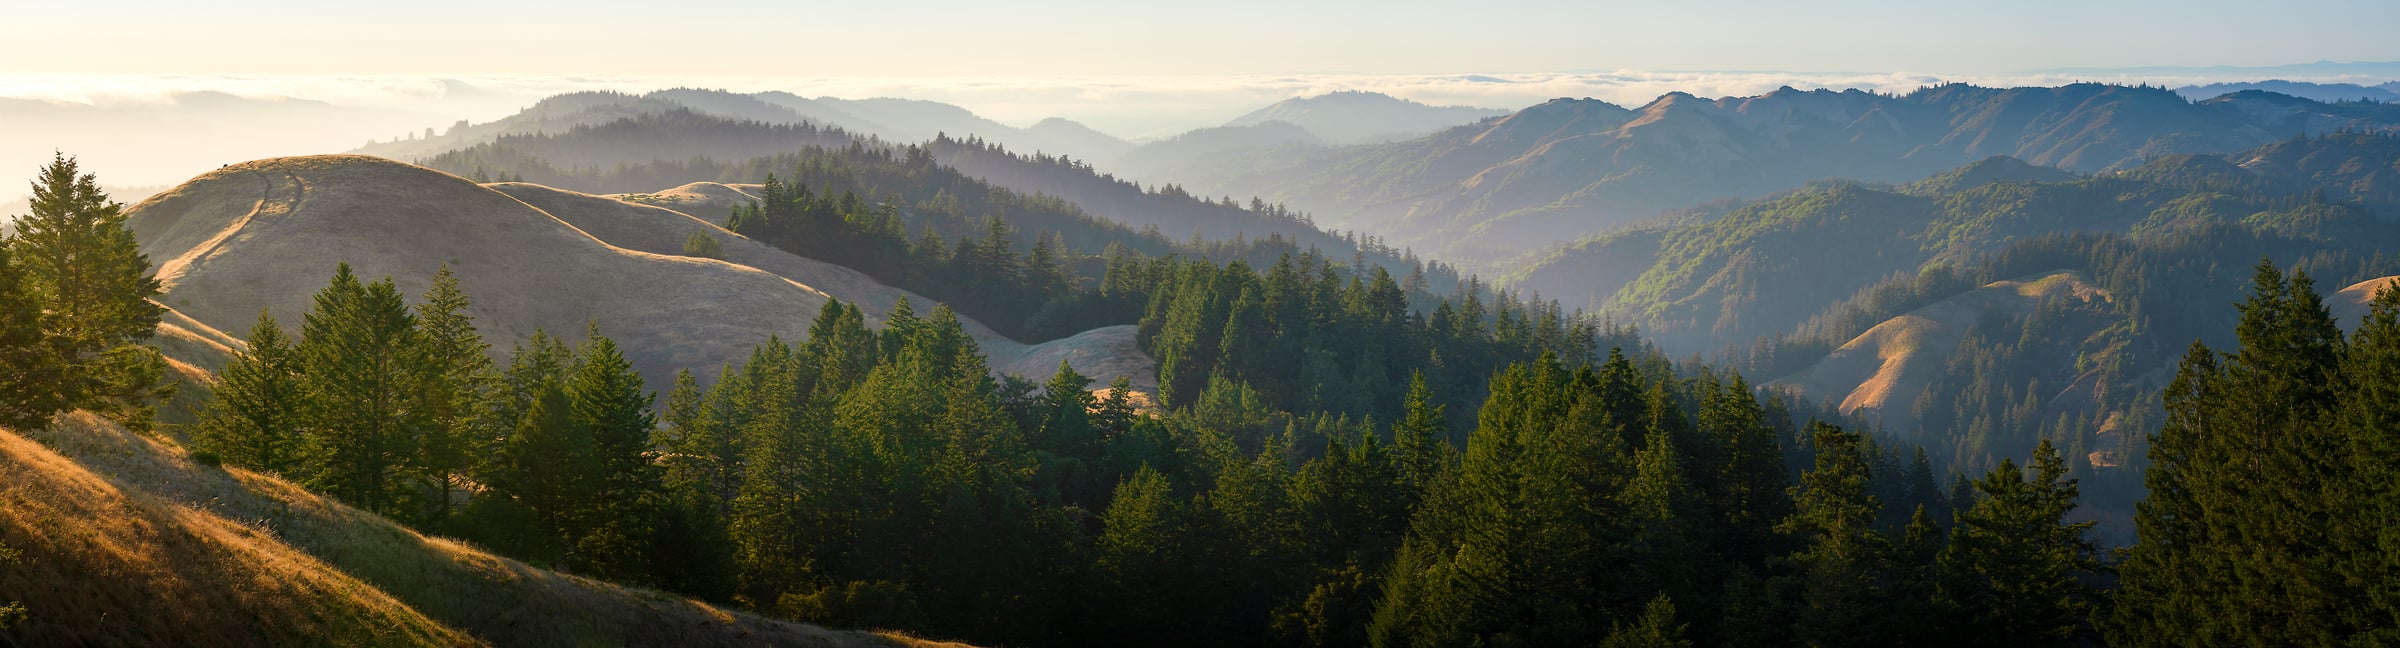 301 megapixels! A very high resolution, panorama photo of rolling hills and trees; landscape photograph created by Jeff Lewis in Marin County, California.